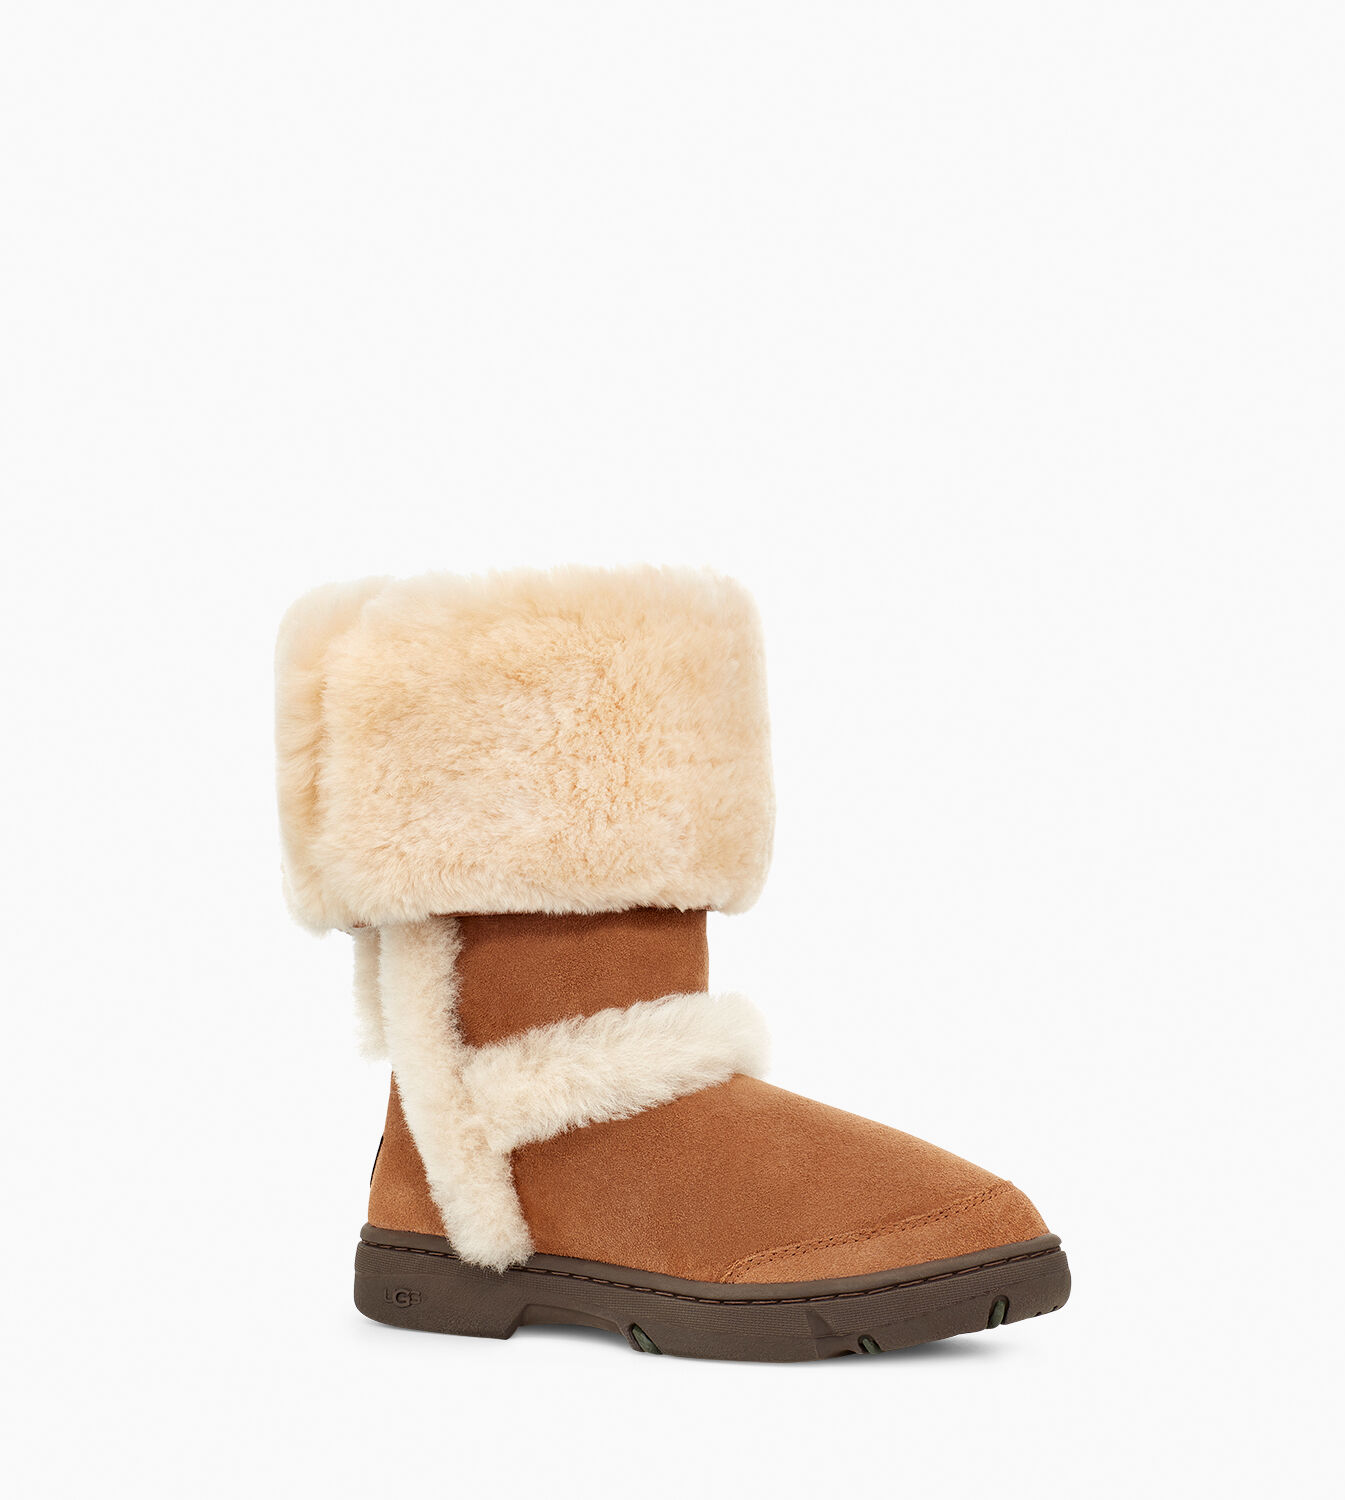 tall uggs with fur on outside